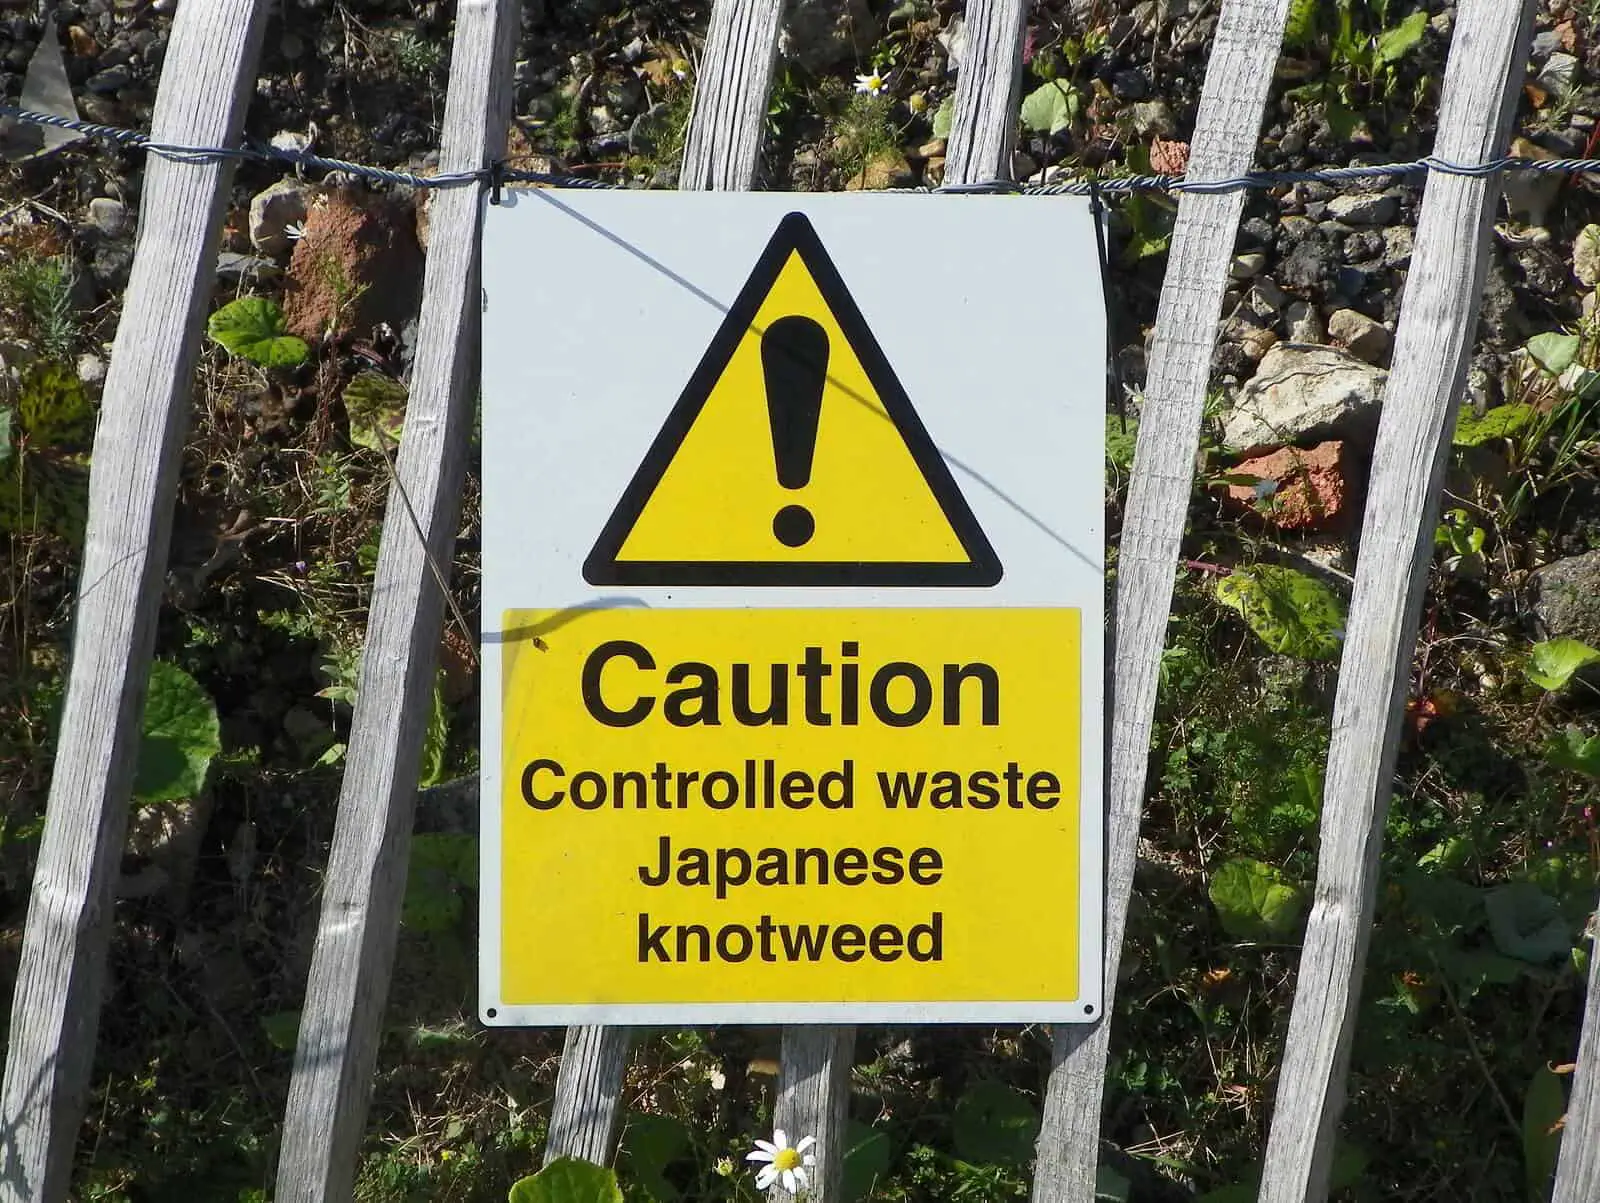 To get rid of Japanese knotweed you'll need a robust treatment plan